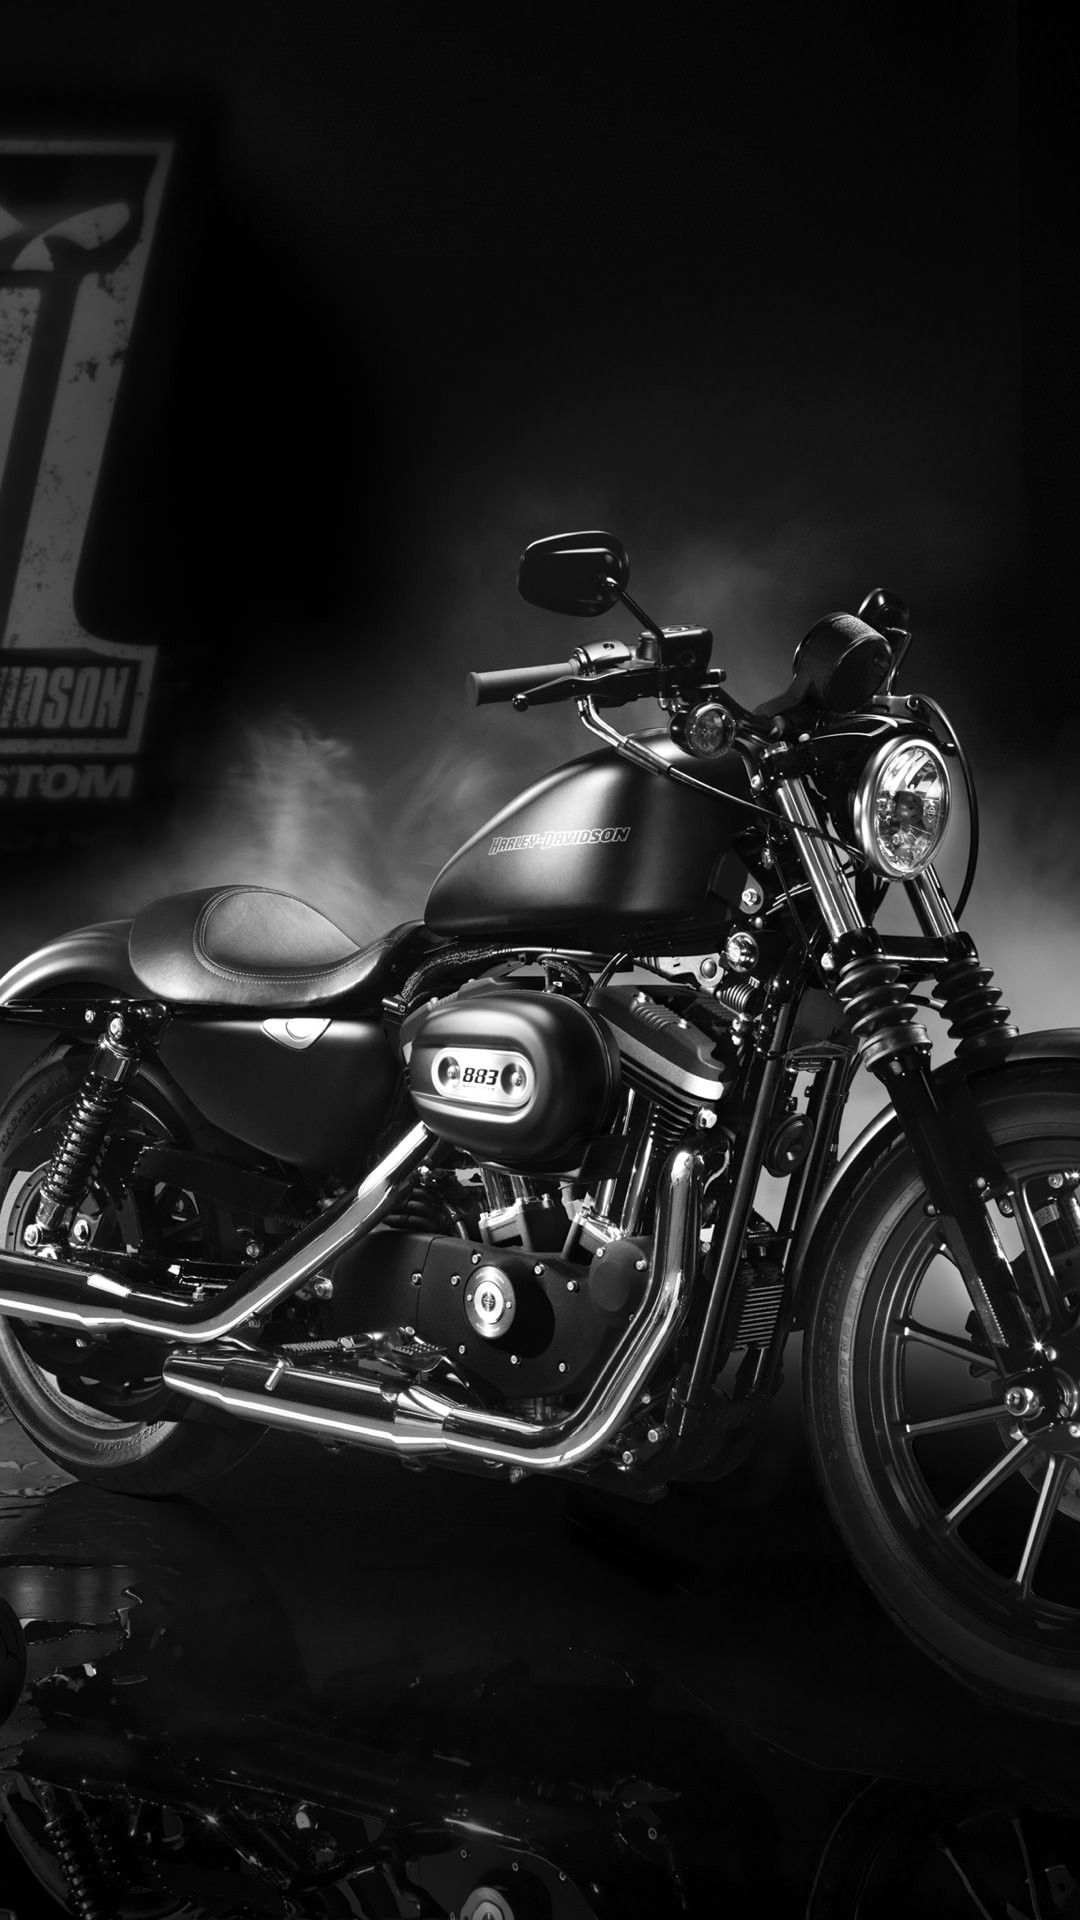 Wallpaper Black and Silver Motorcycle in a Dark Room, Background - Download  Free Image